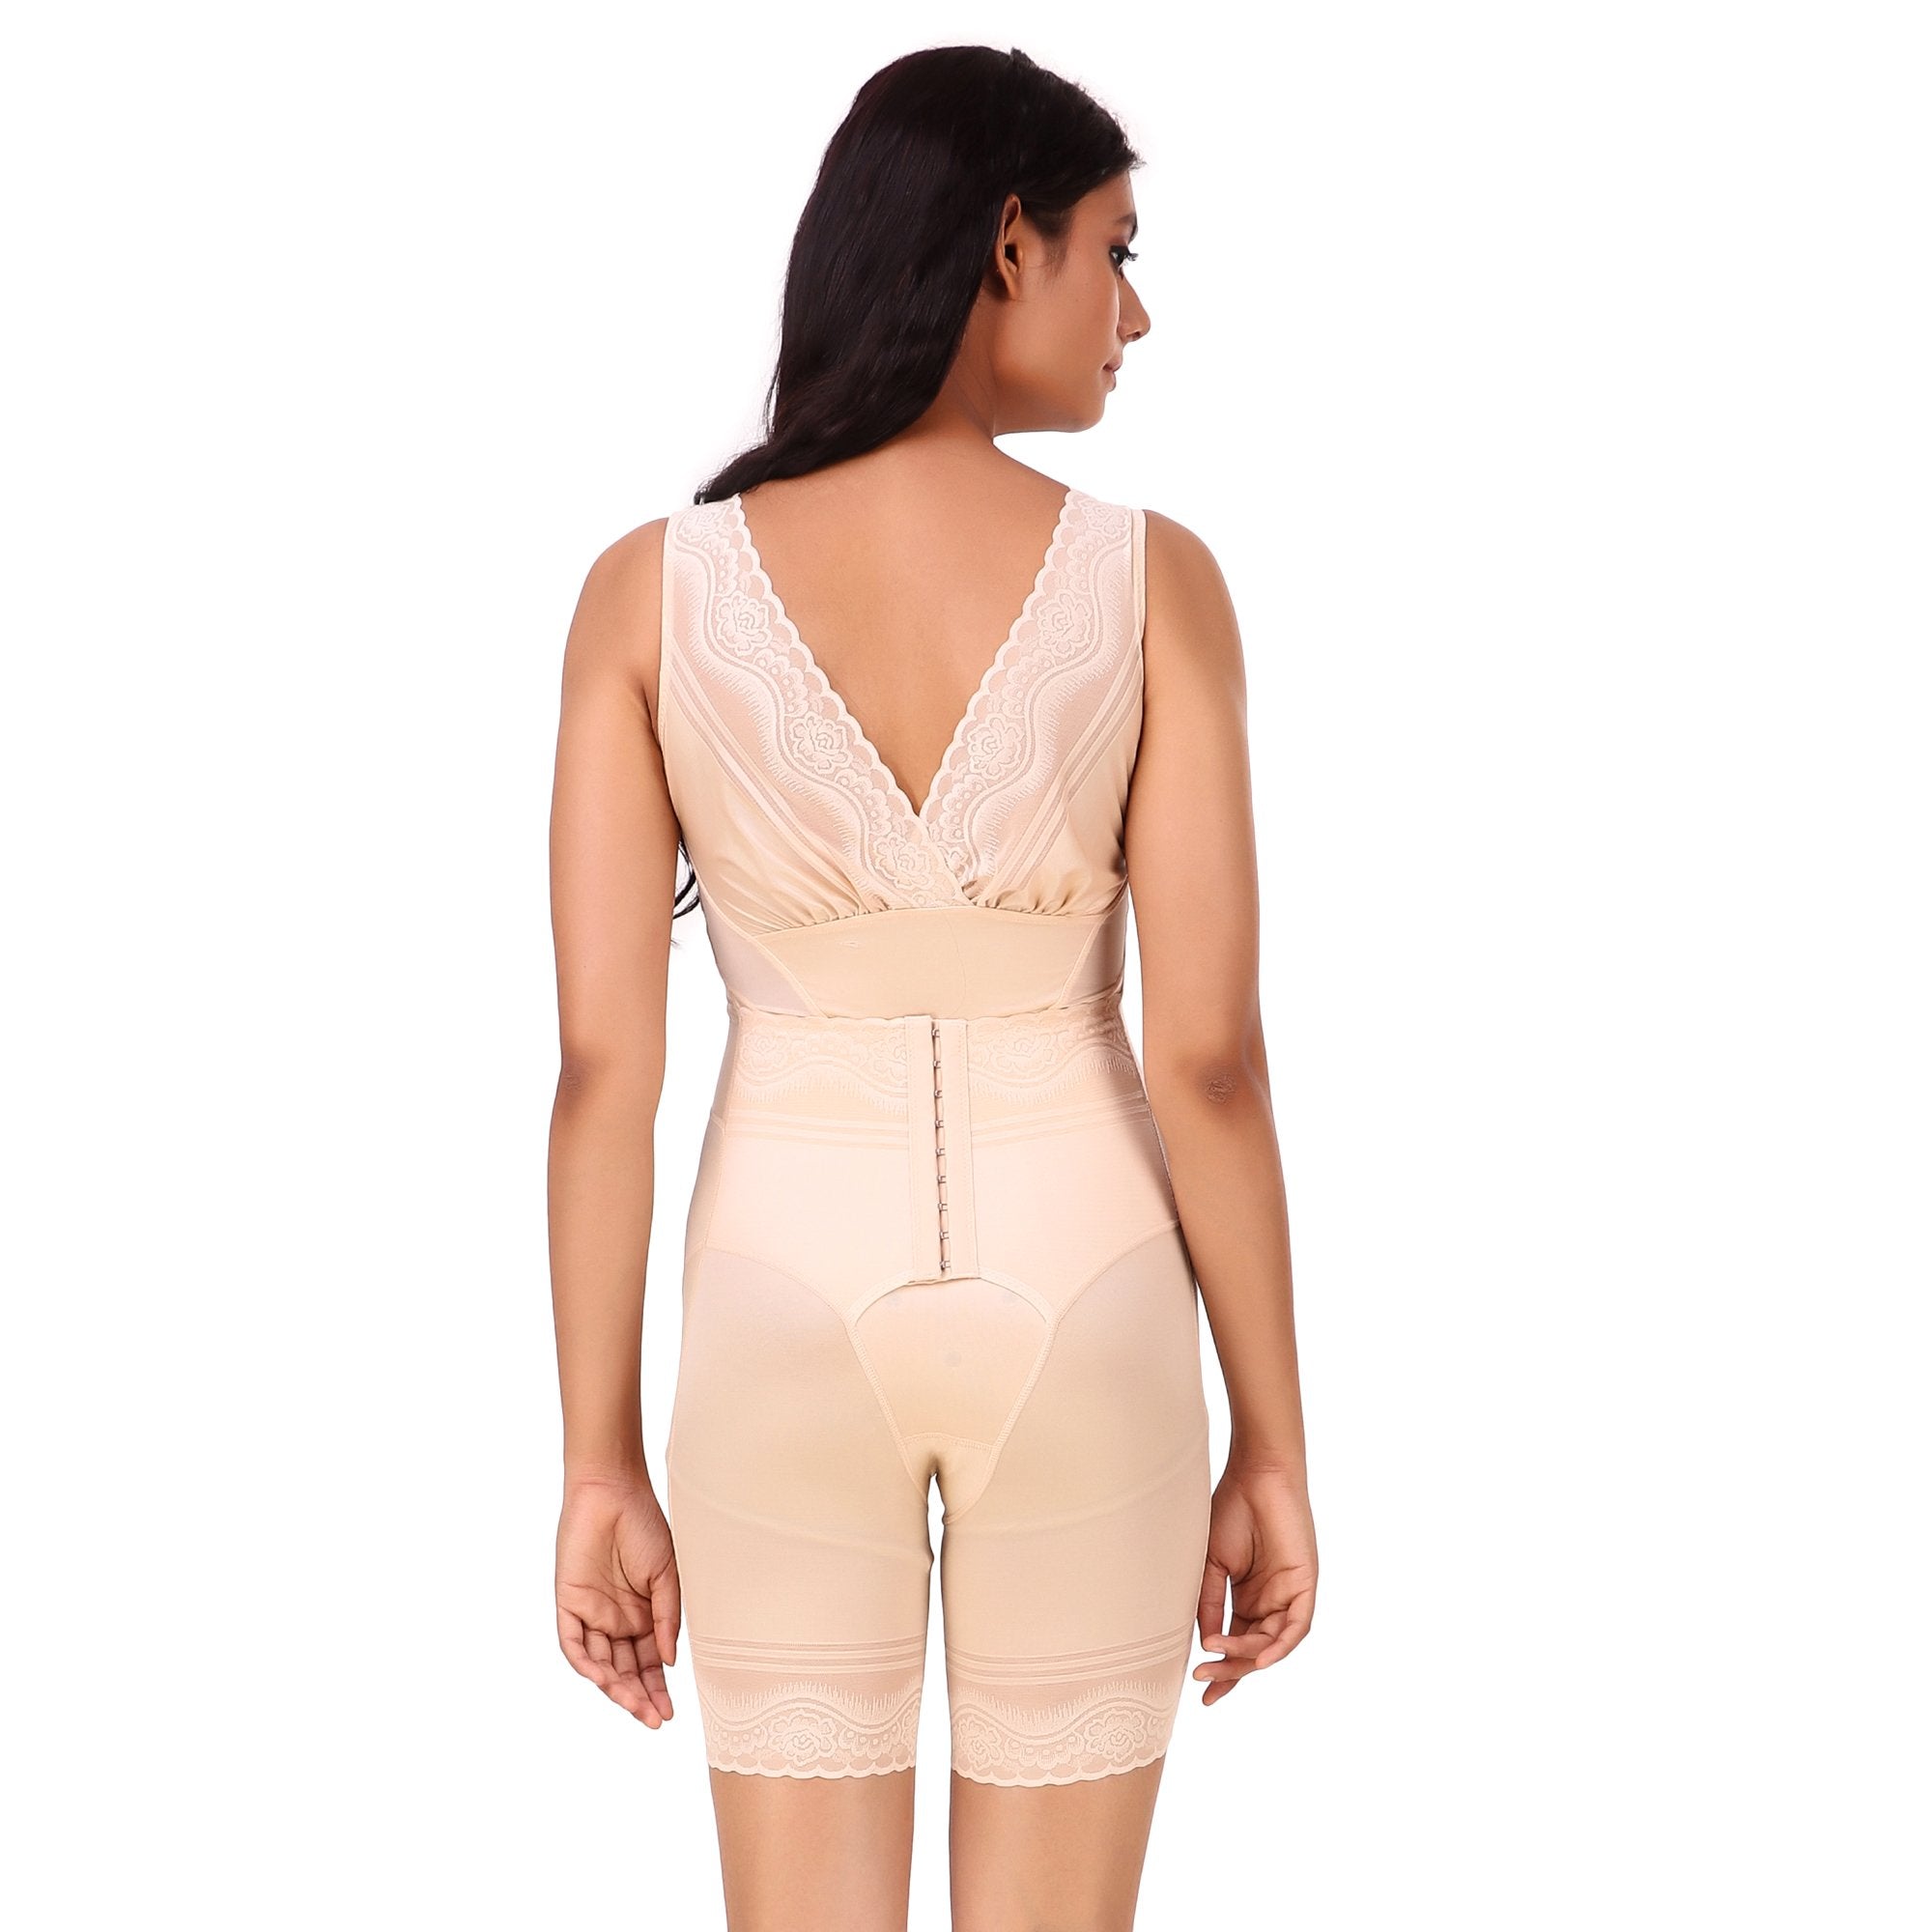 SHAPSHE Lace Bodysuit for Women Tummy Control India